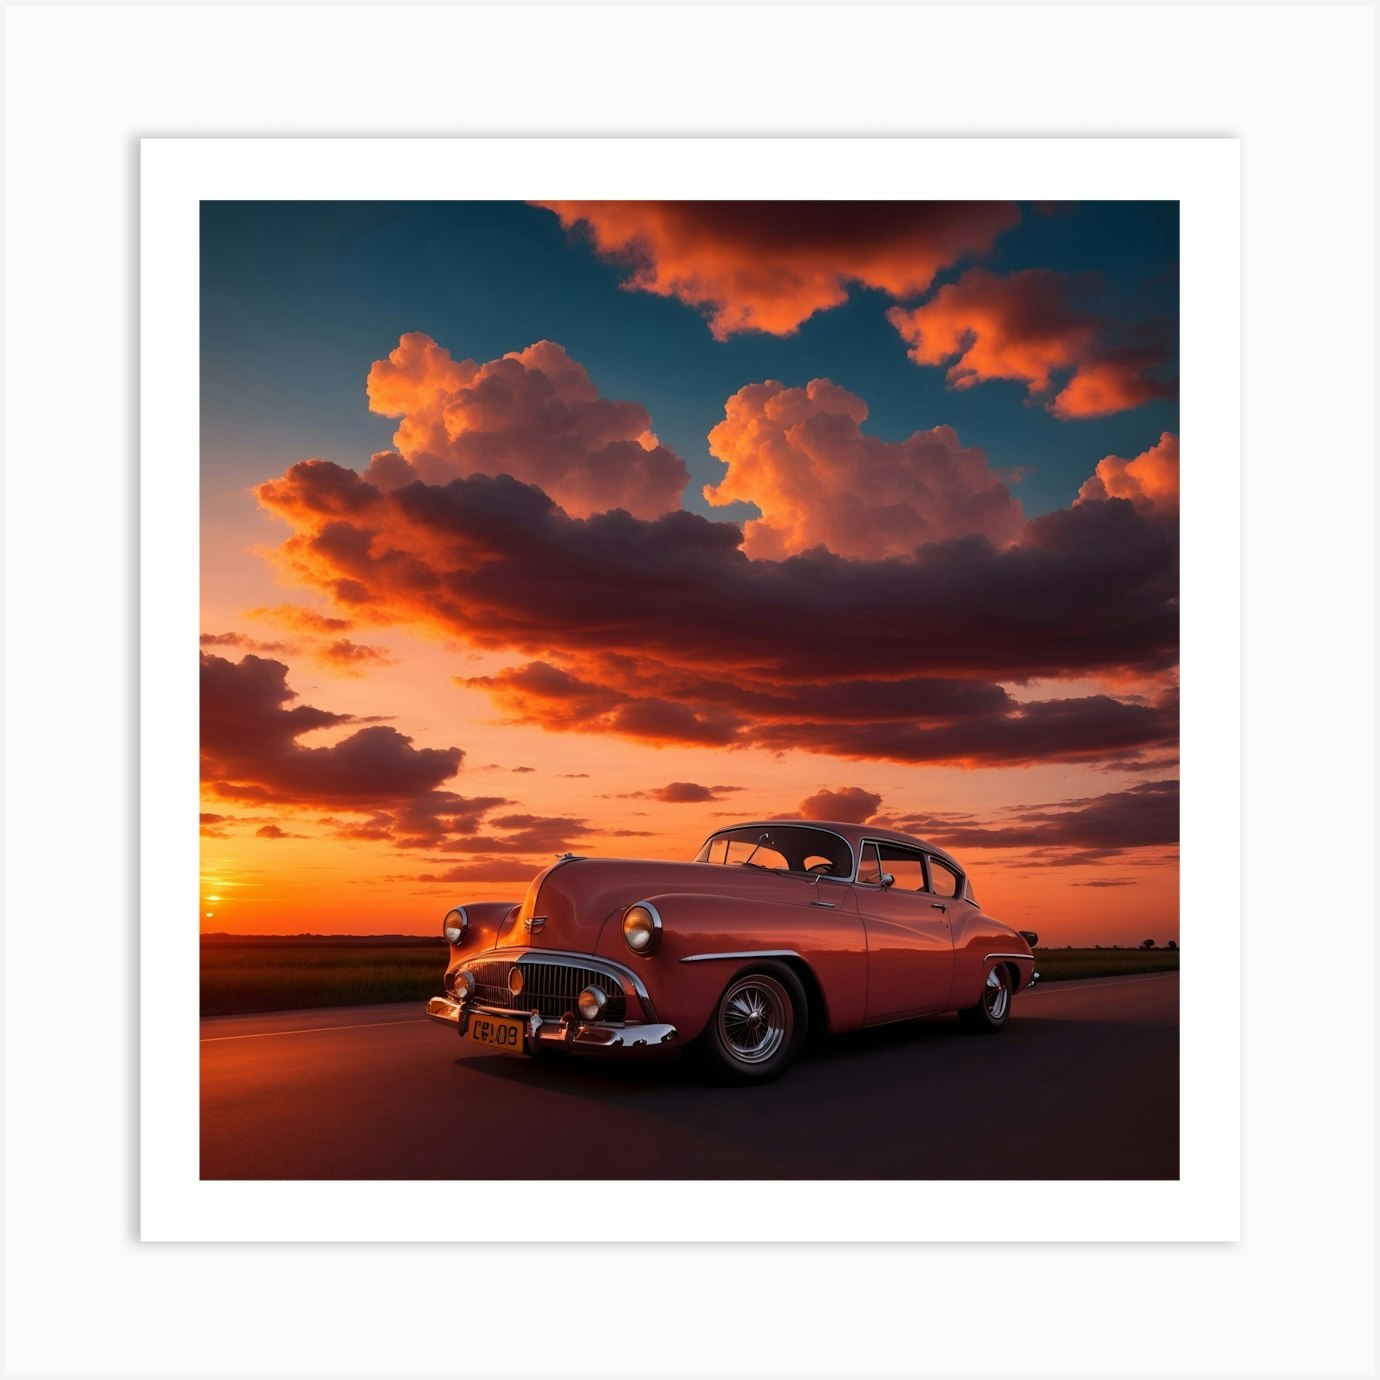 Sunset Over A Classic Car Art Print by Fateh Kroini - Fy